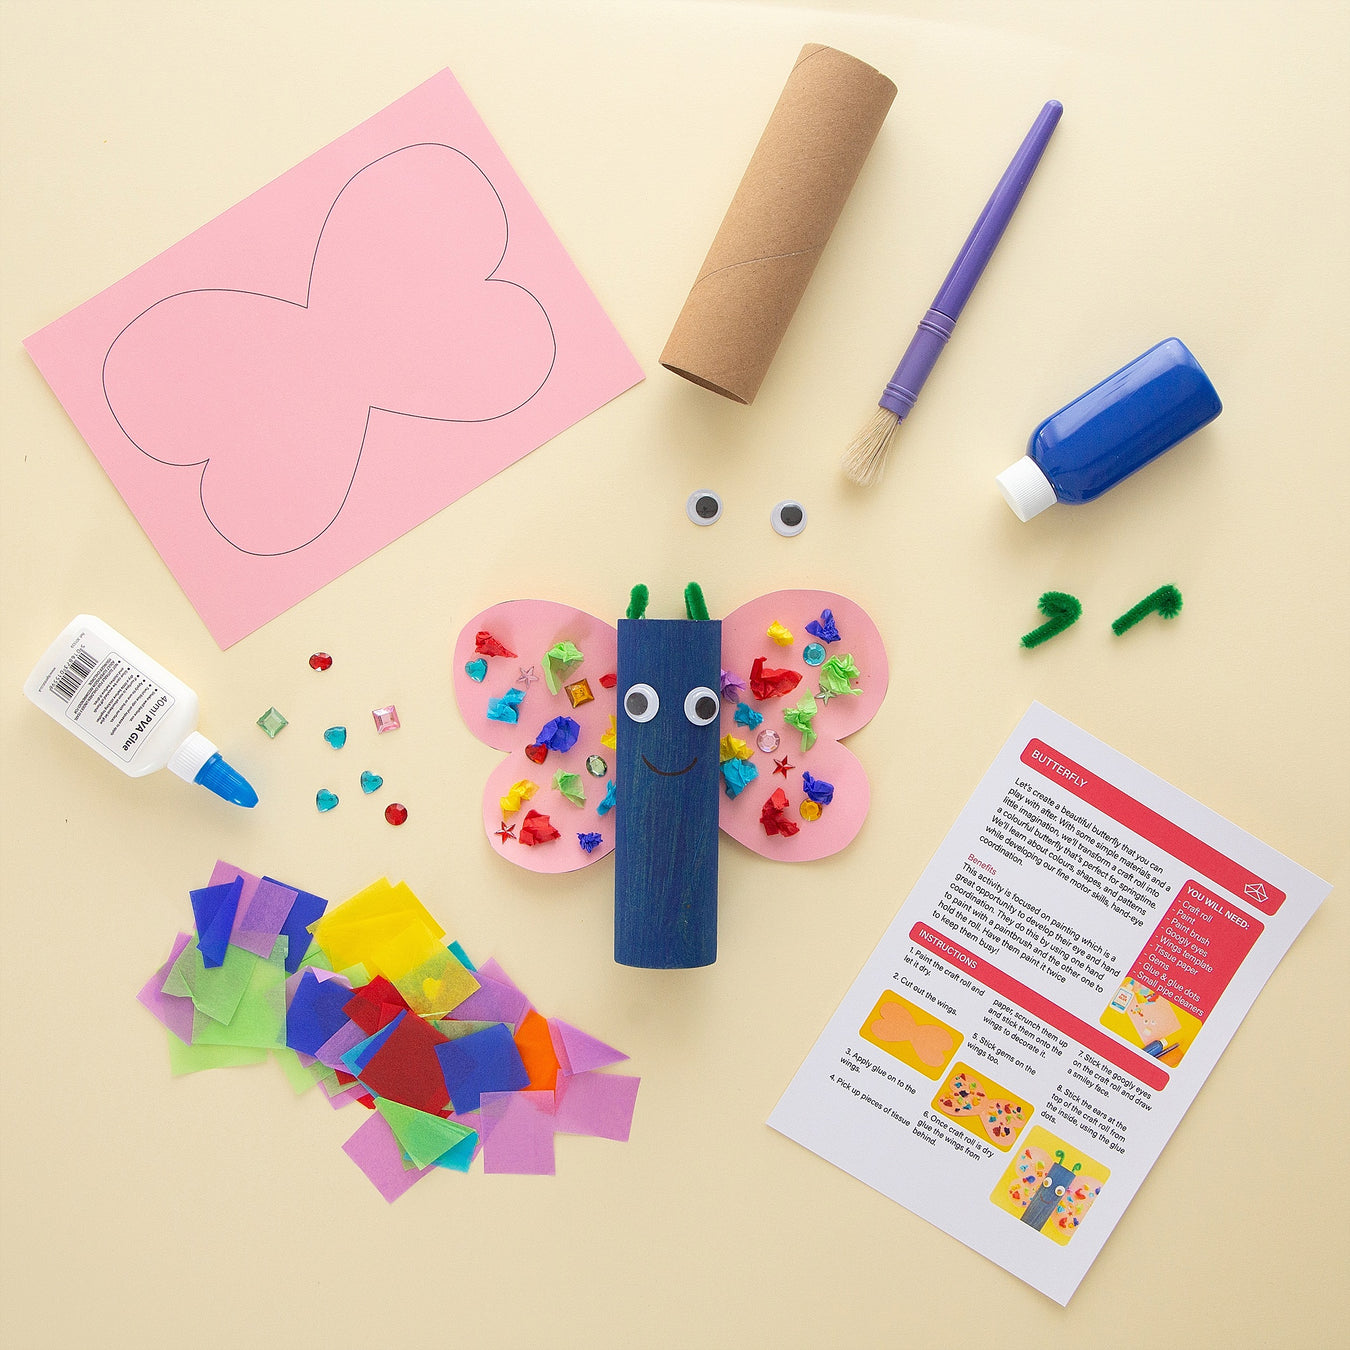 Butterfly activity for children from My Mini Maker